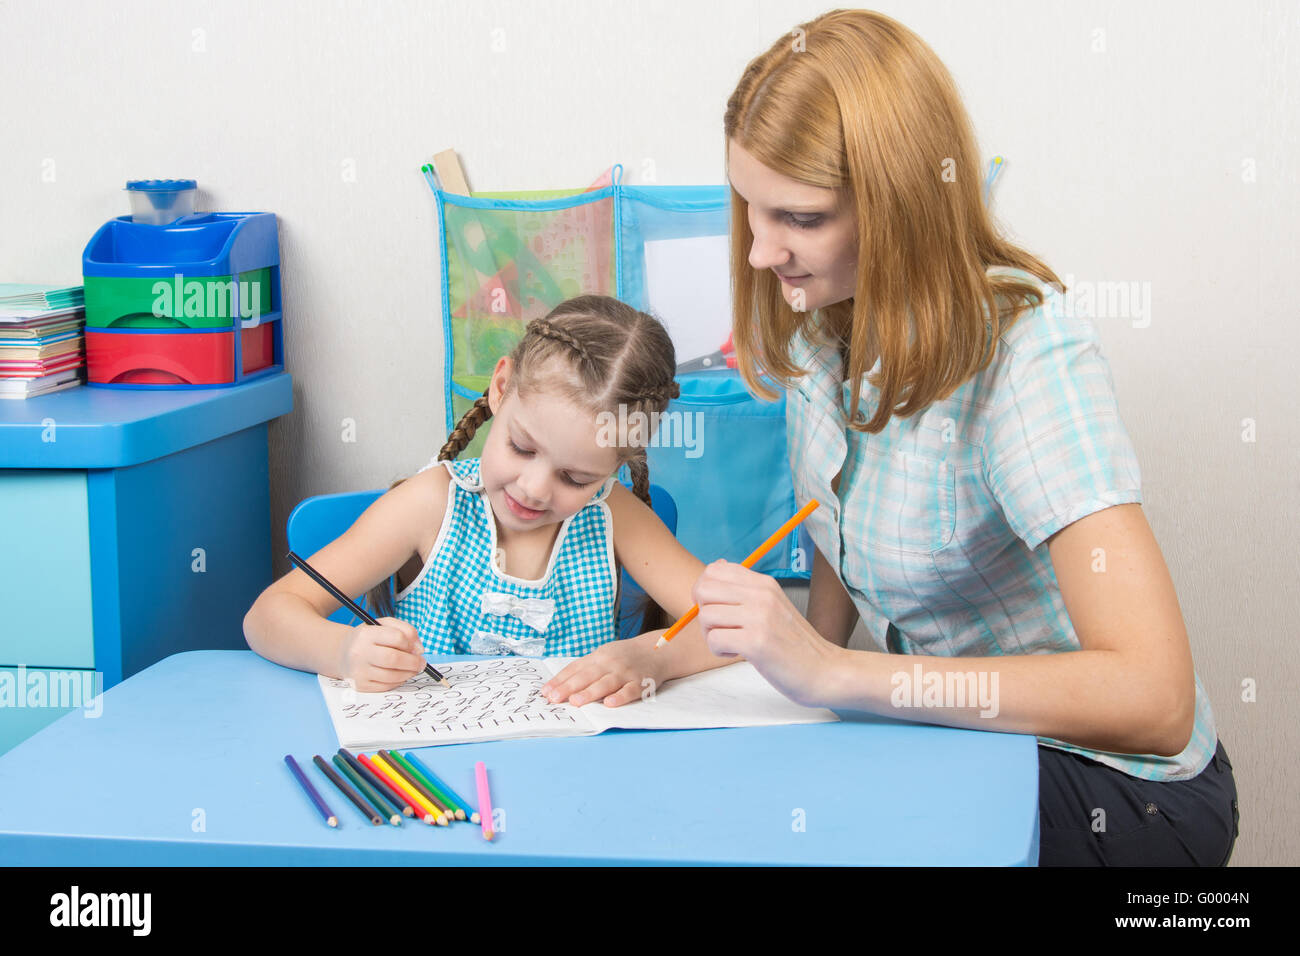 The young girl engaged in a five year old girl spelling Stock Photo